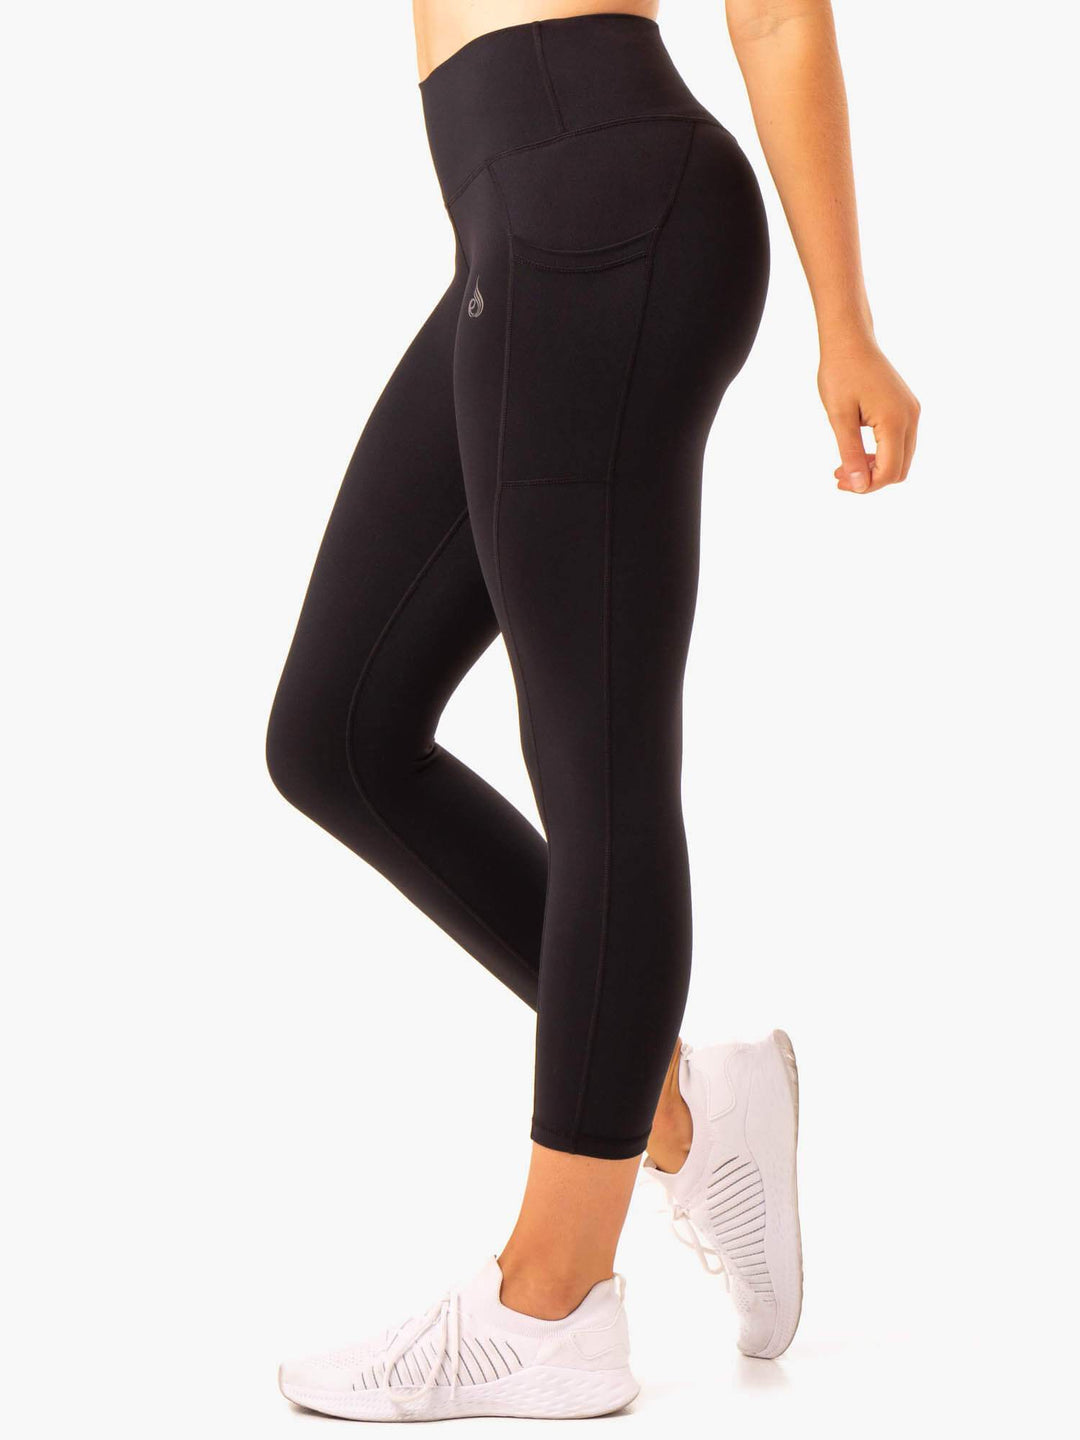 Riding Leggings For Women With Phone Pocket  International Society of  Precision Agriculture